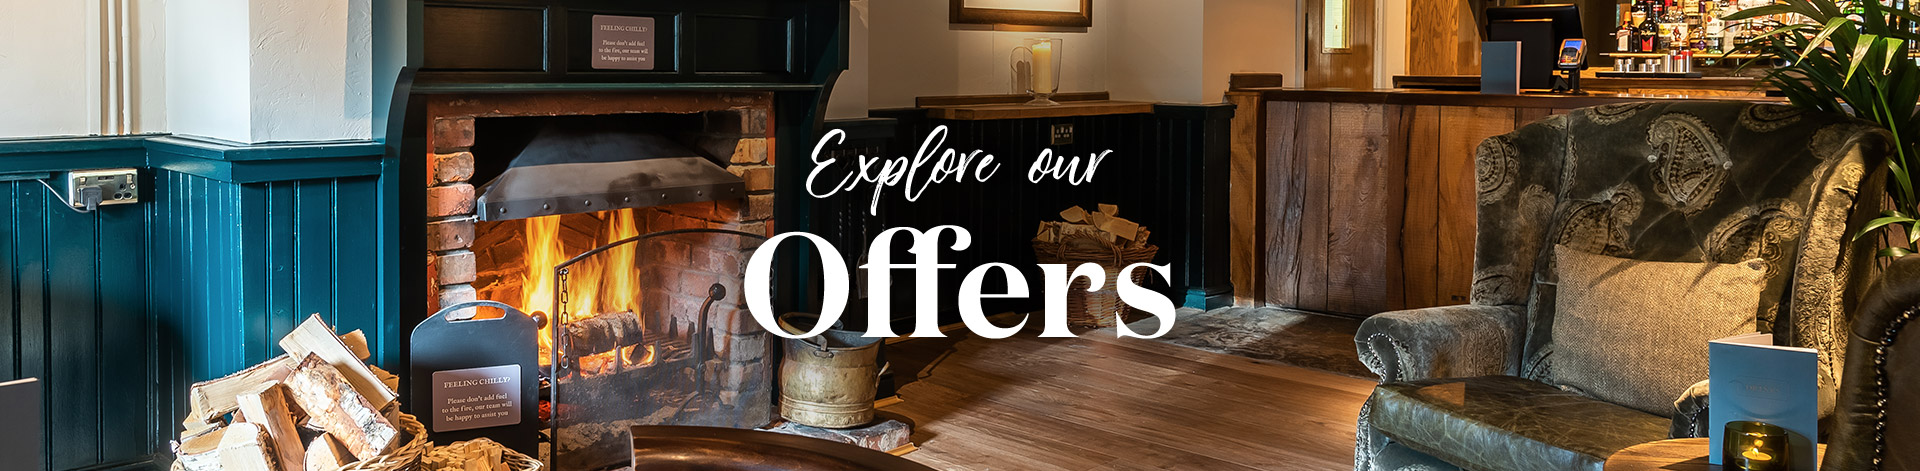 Our latest offers at The Tawny Owl